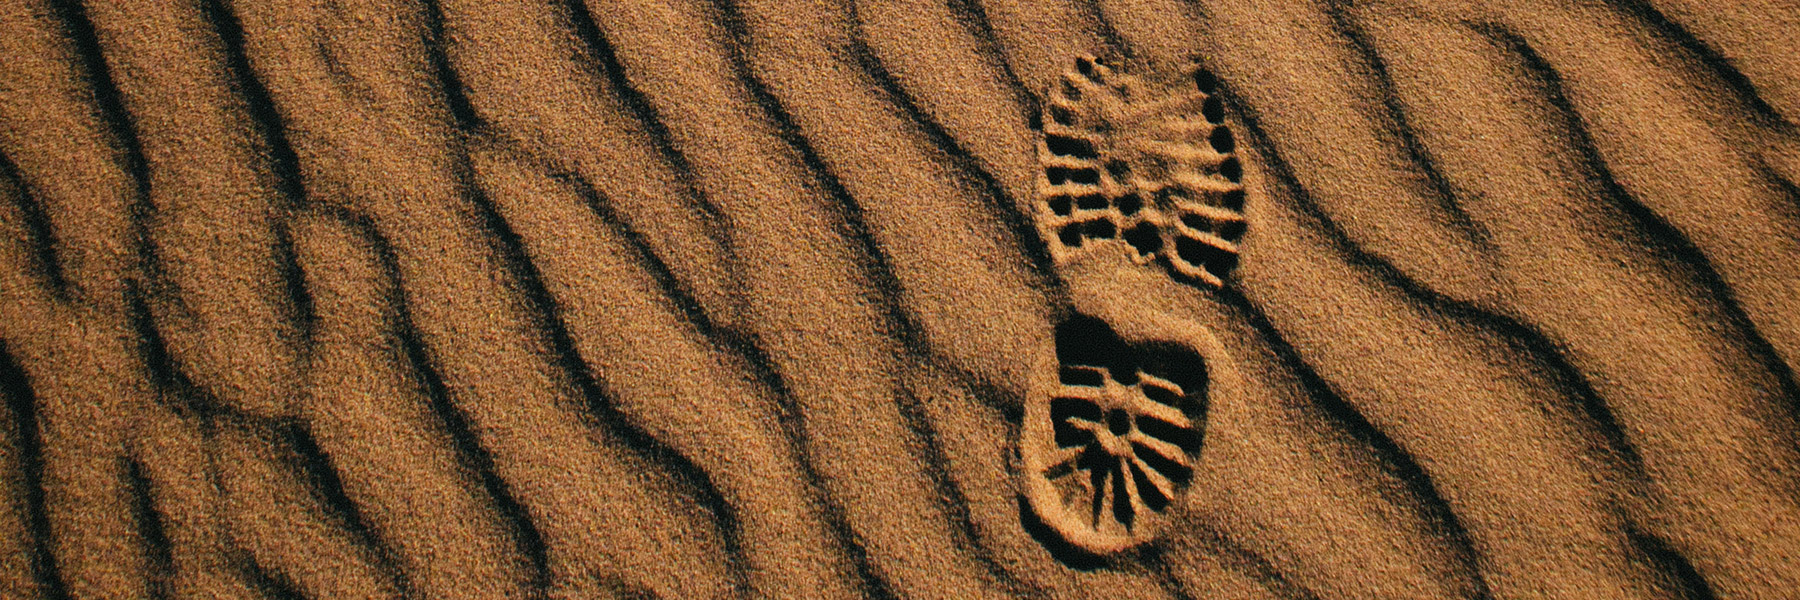 footprint in the sand